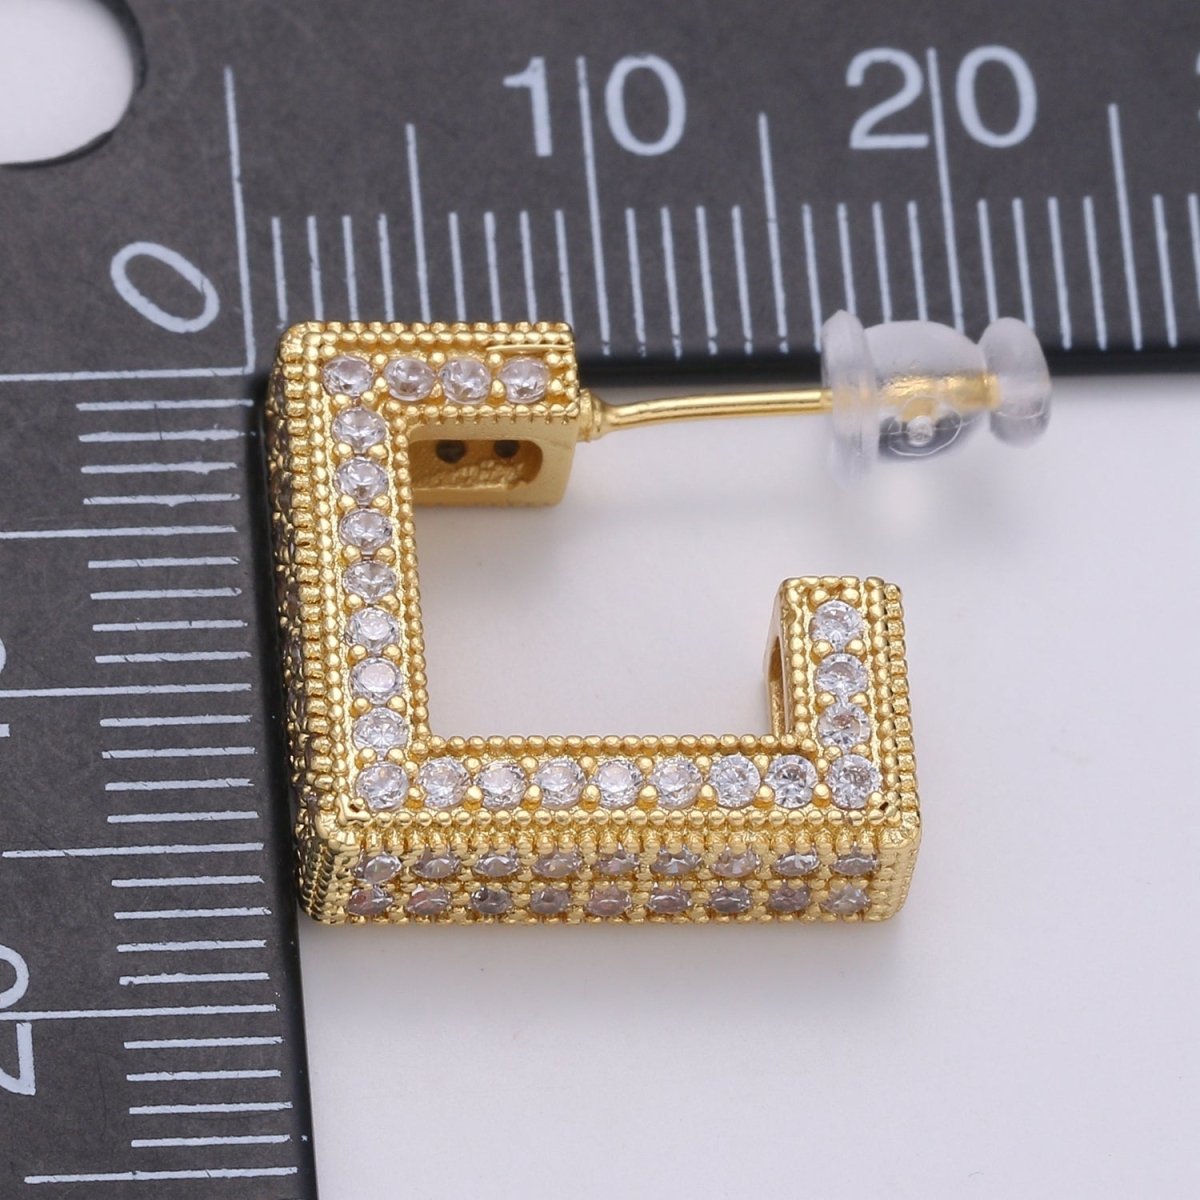 Ethnic Design 24K Gold Plated Pave CZ Stud Earring, Gold filled Micro Pave Earring for DIY Earring Craft Supply Jewelry Making Q-410 - DLUXCA